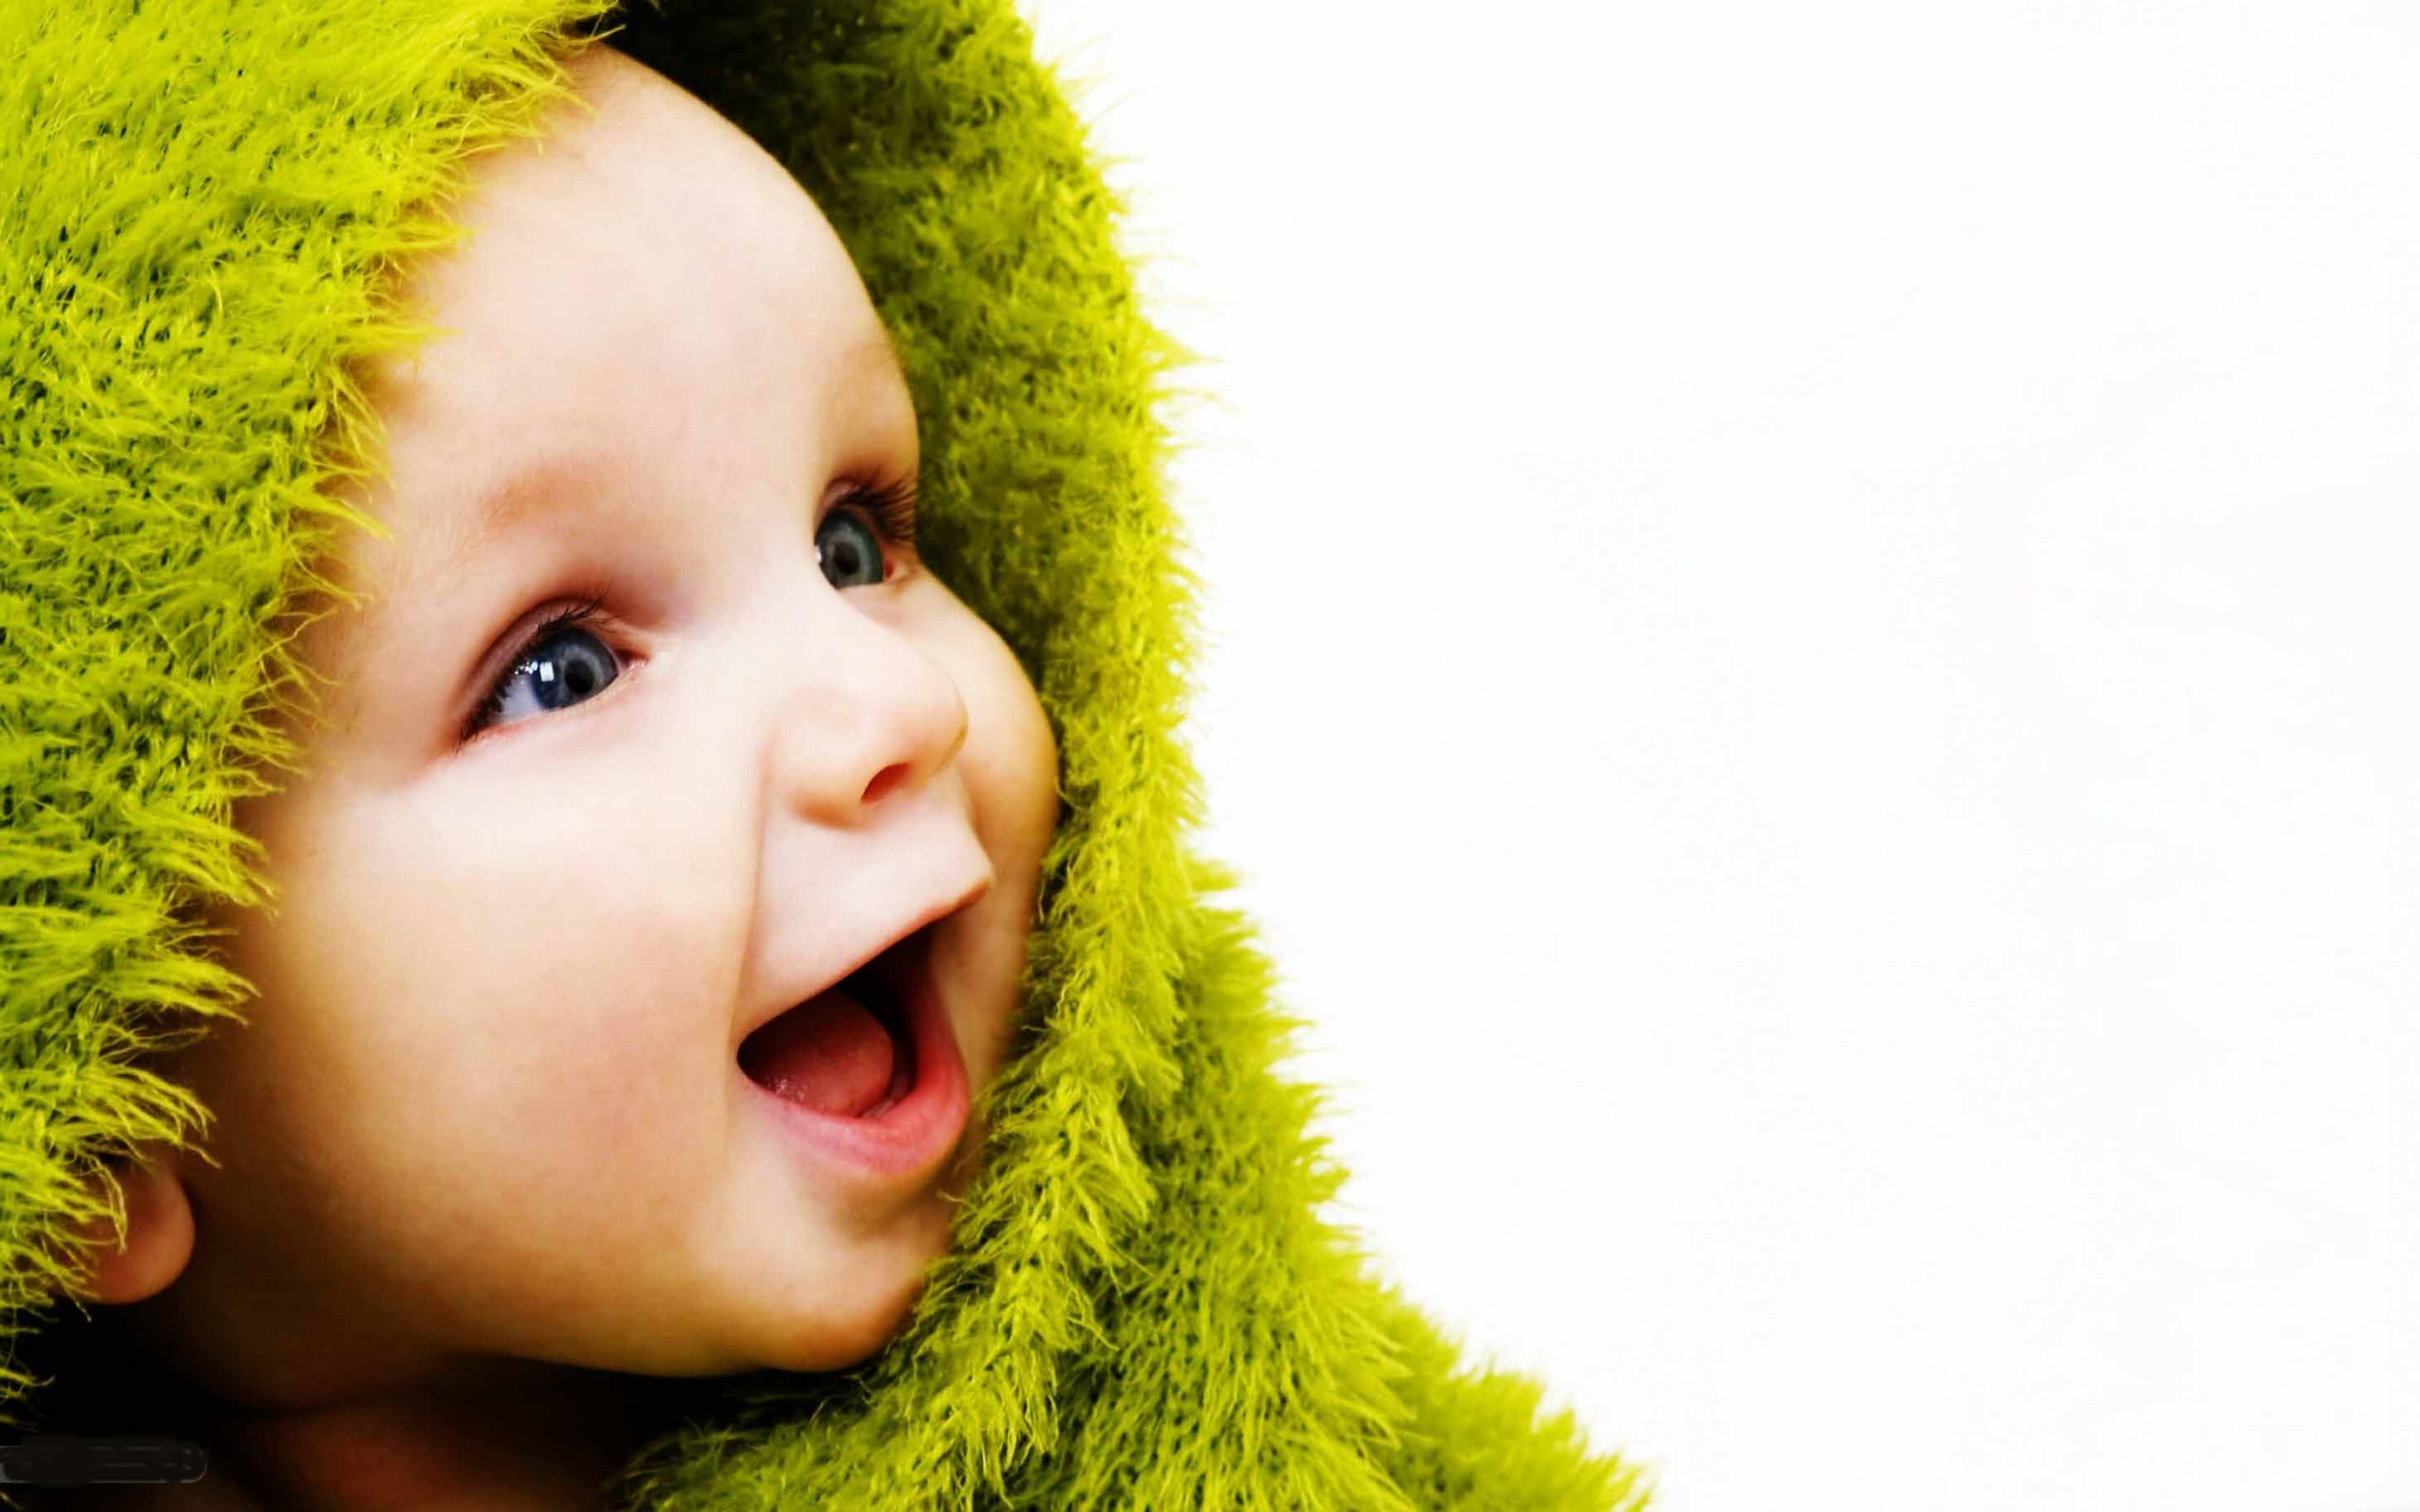 indian baby boy wallpapers for desktop,child,face,green,facial expression,skin